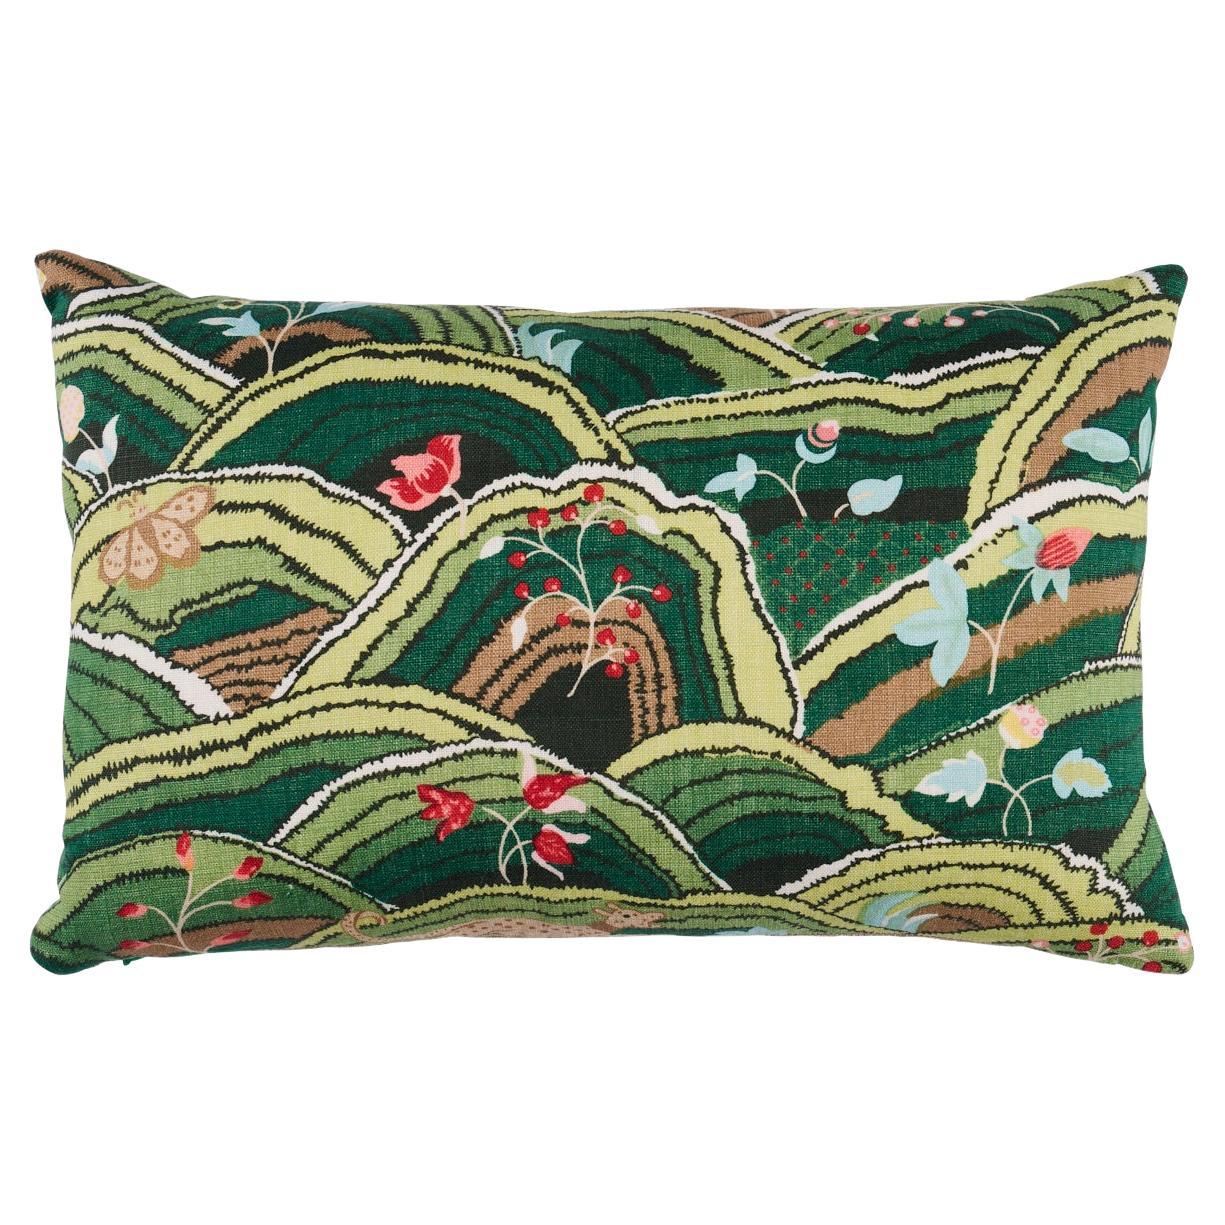 Shumacher Rolling Hills 18x12" Pillow in Green For Sale